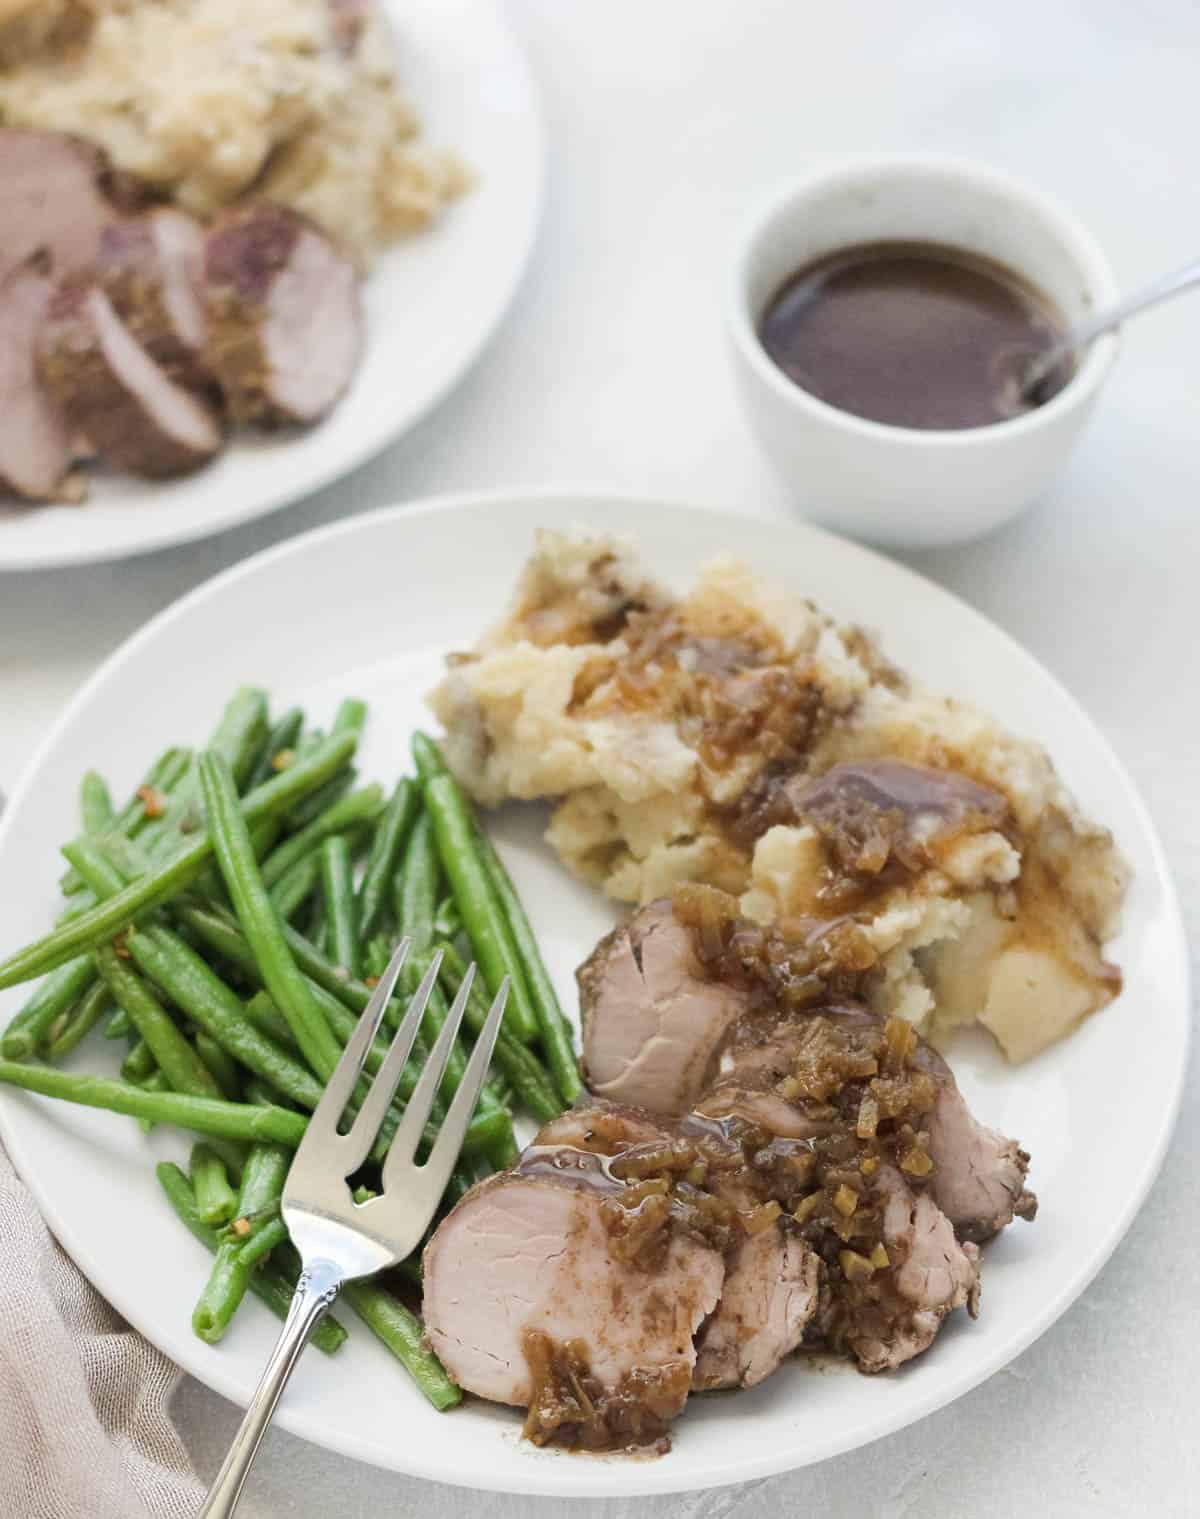 fork on a plate with green beans, pork tenderloin, and mashed potatoes next to a bowl of gravy.